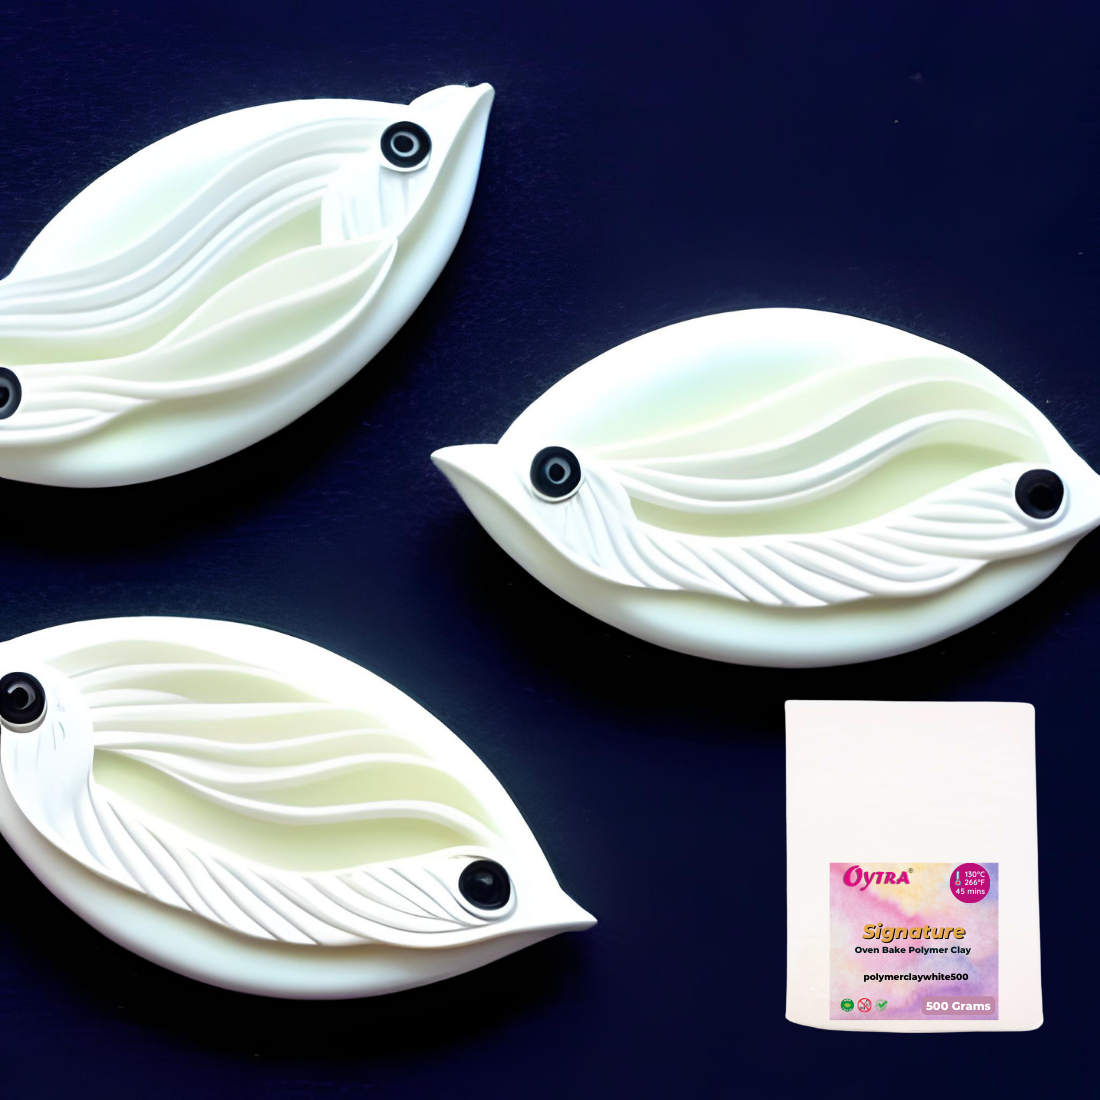 Pure White Polymer Clay Signature Series for Jewelry Making by Oytra